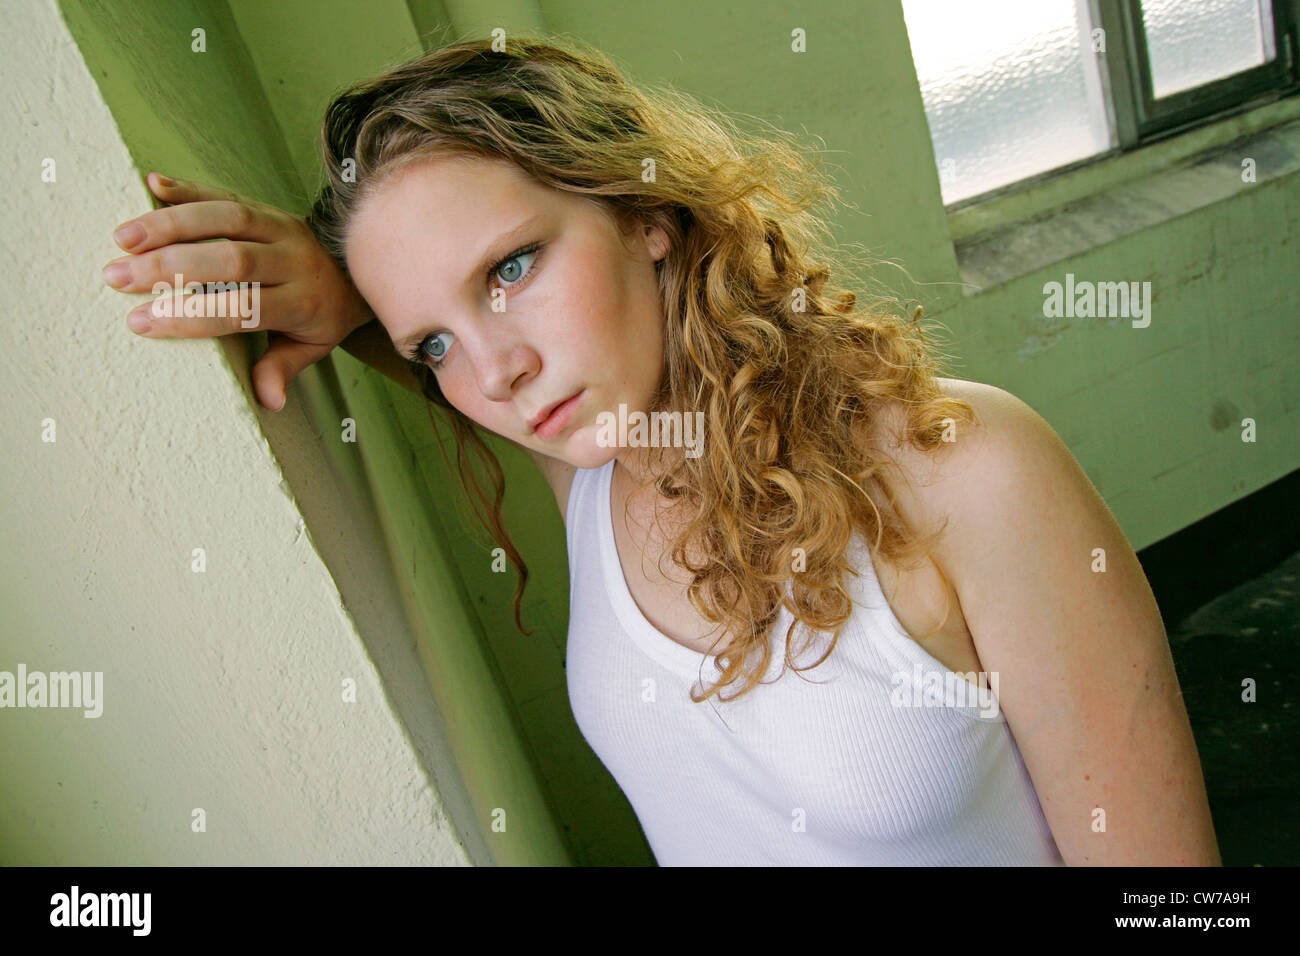 young woman leaning against wall, Germany Stock Photo